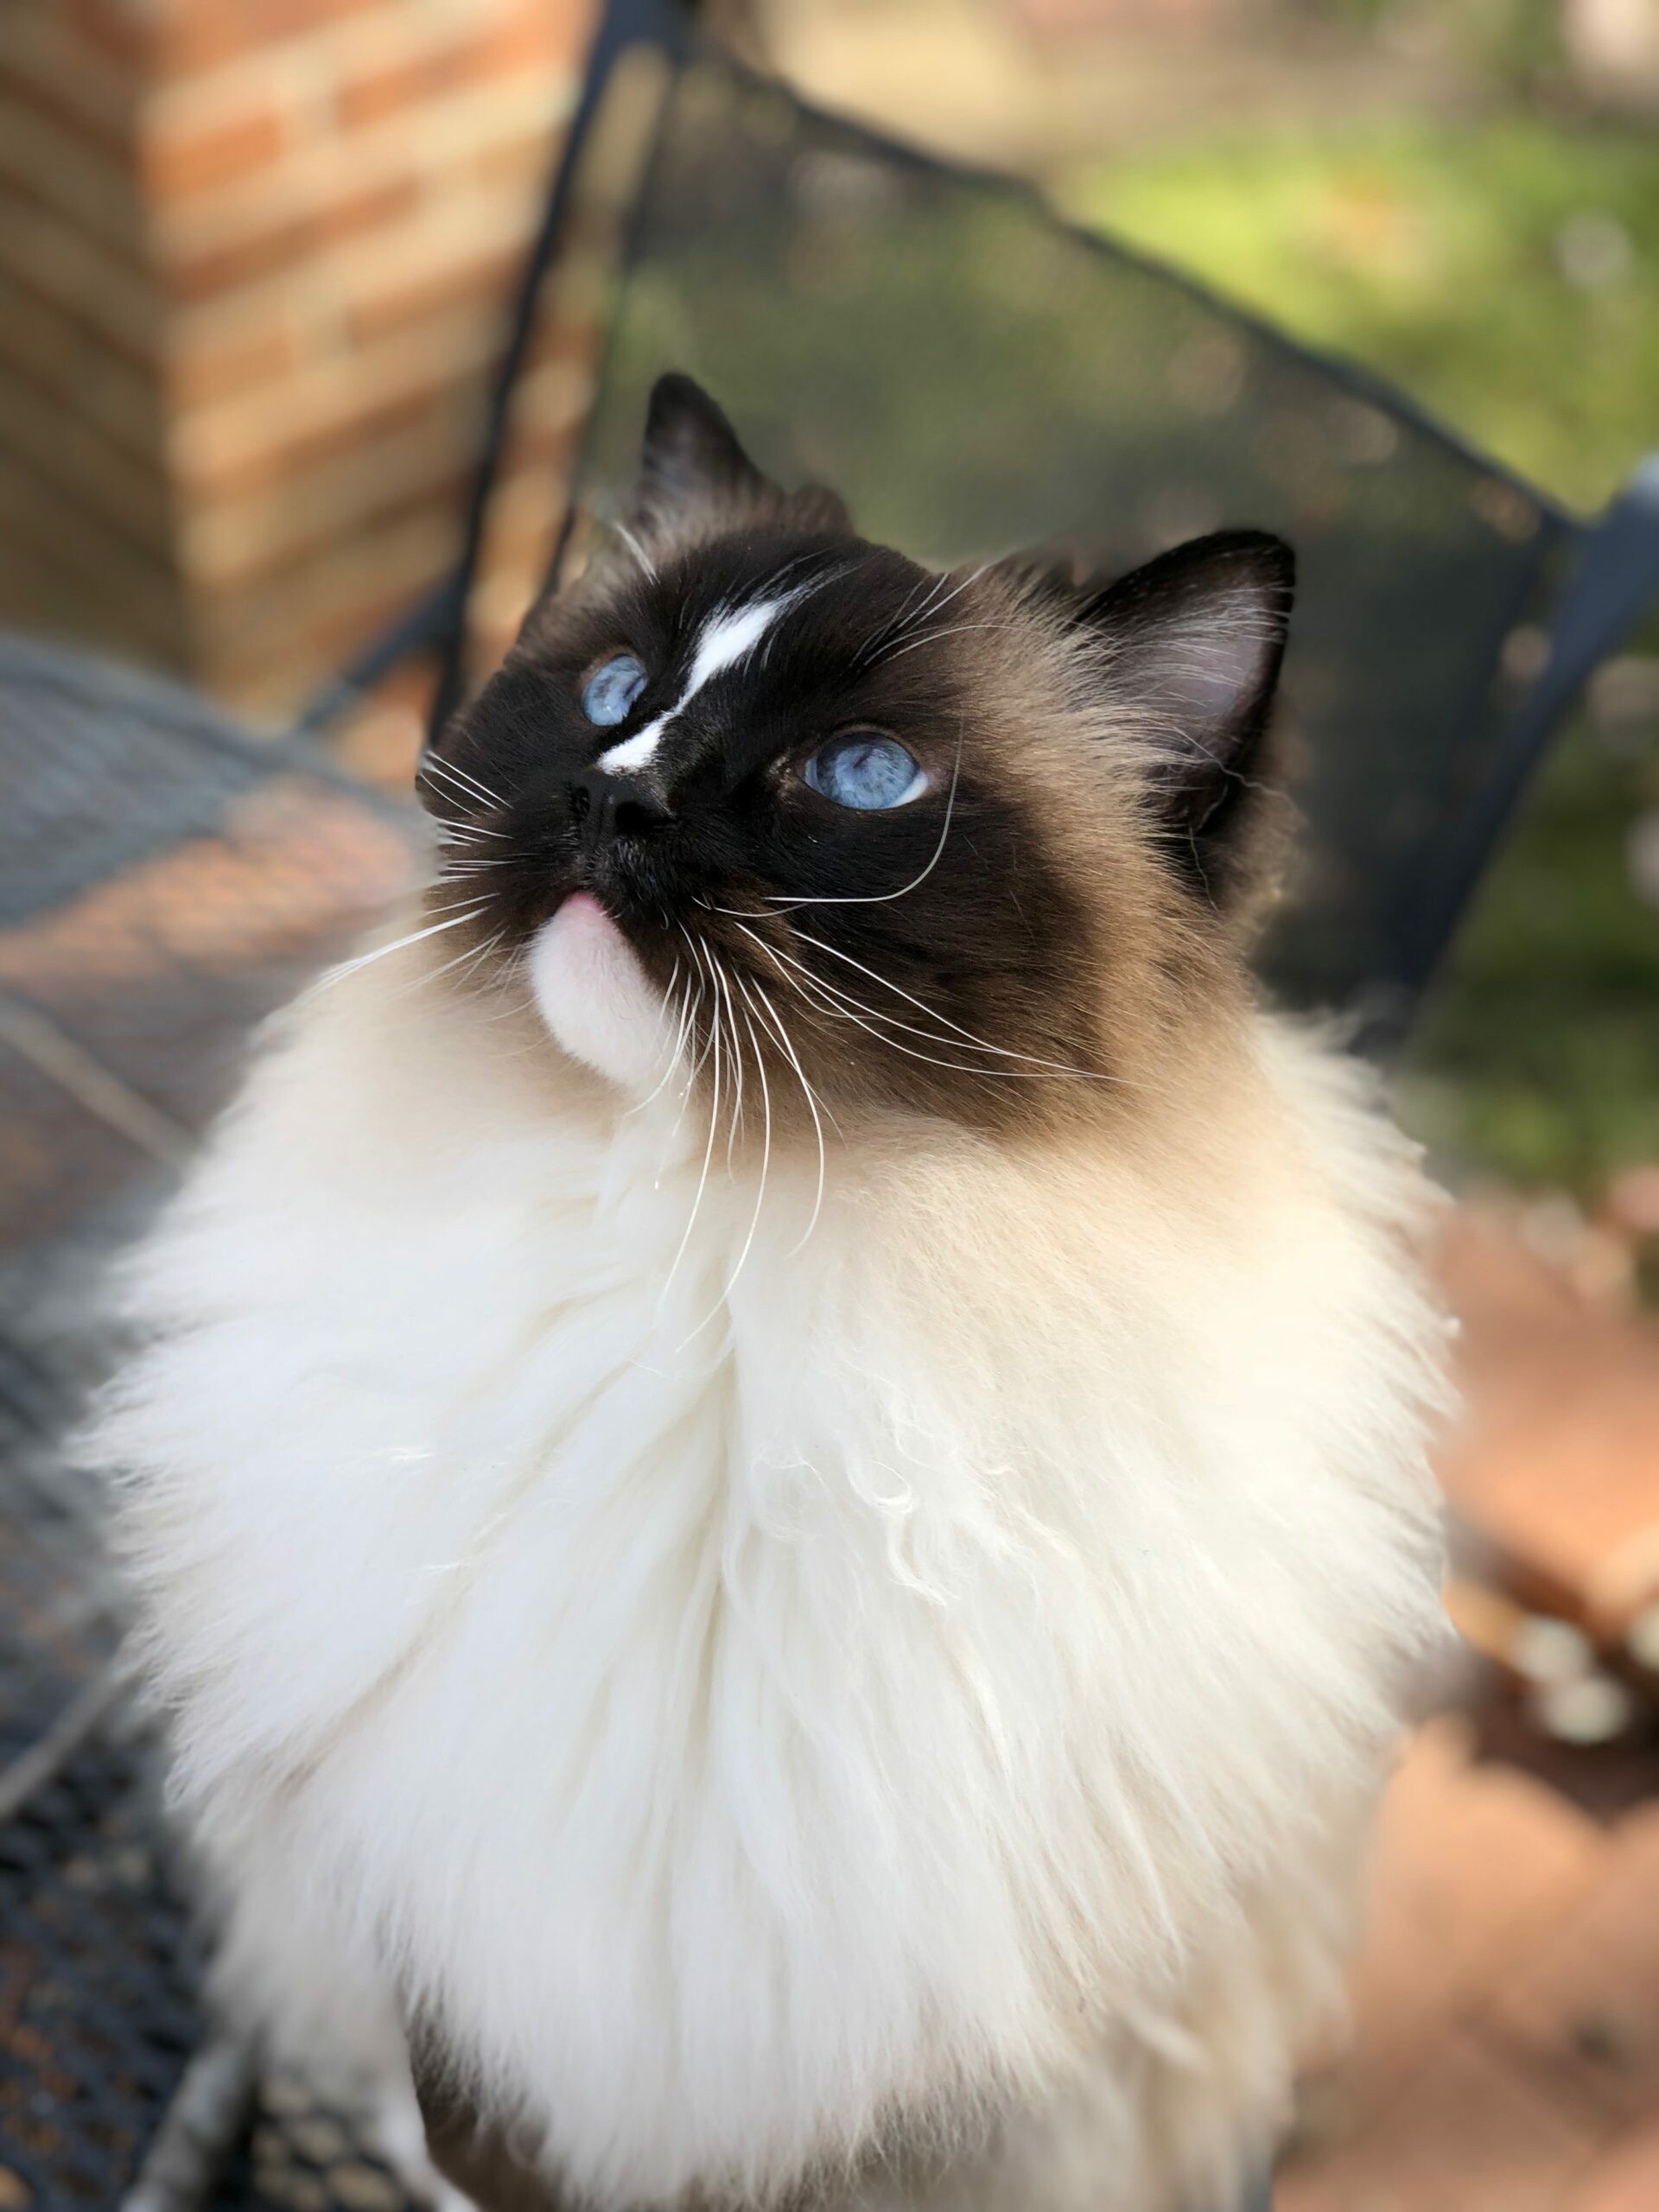 Ragdoll: Its morphology is large and weighty, and it has a semi-long and silky soft coat, Pet. 1920x2560 HD Wallpaper.